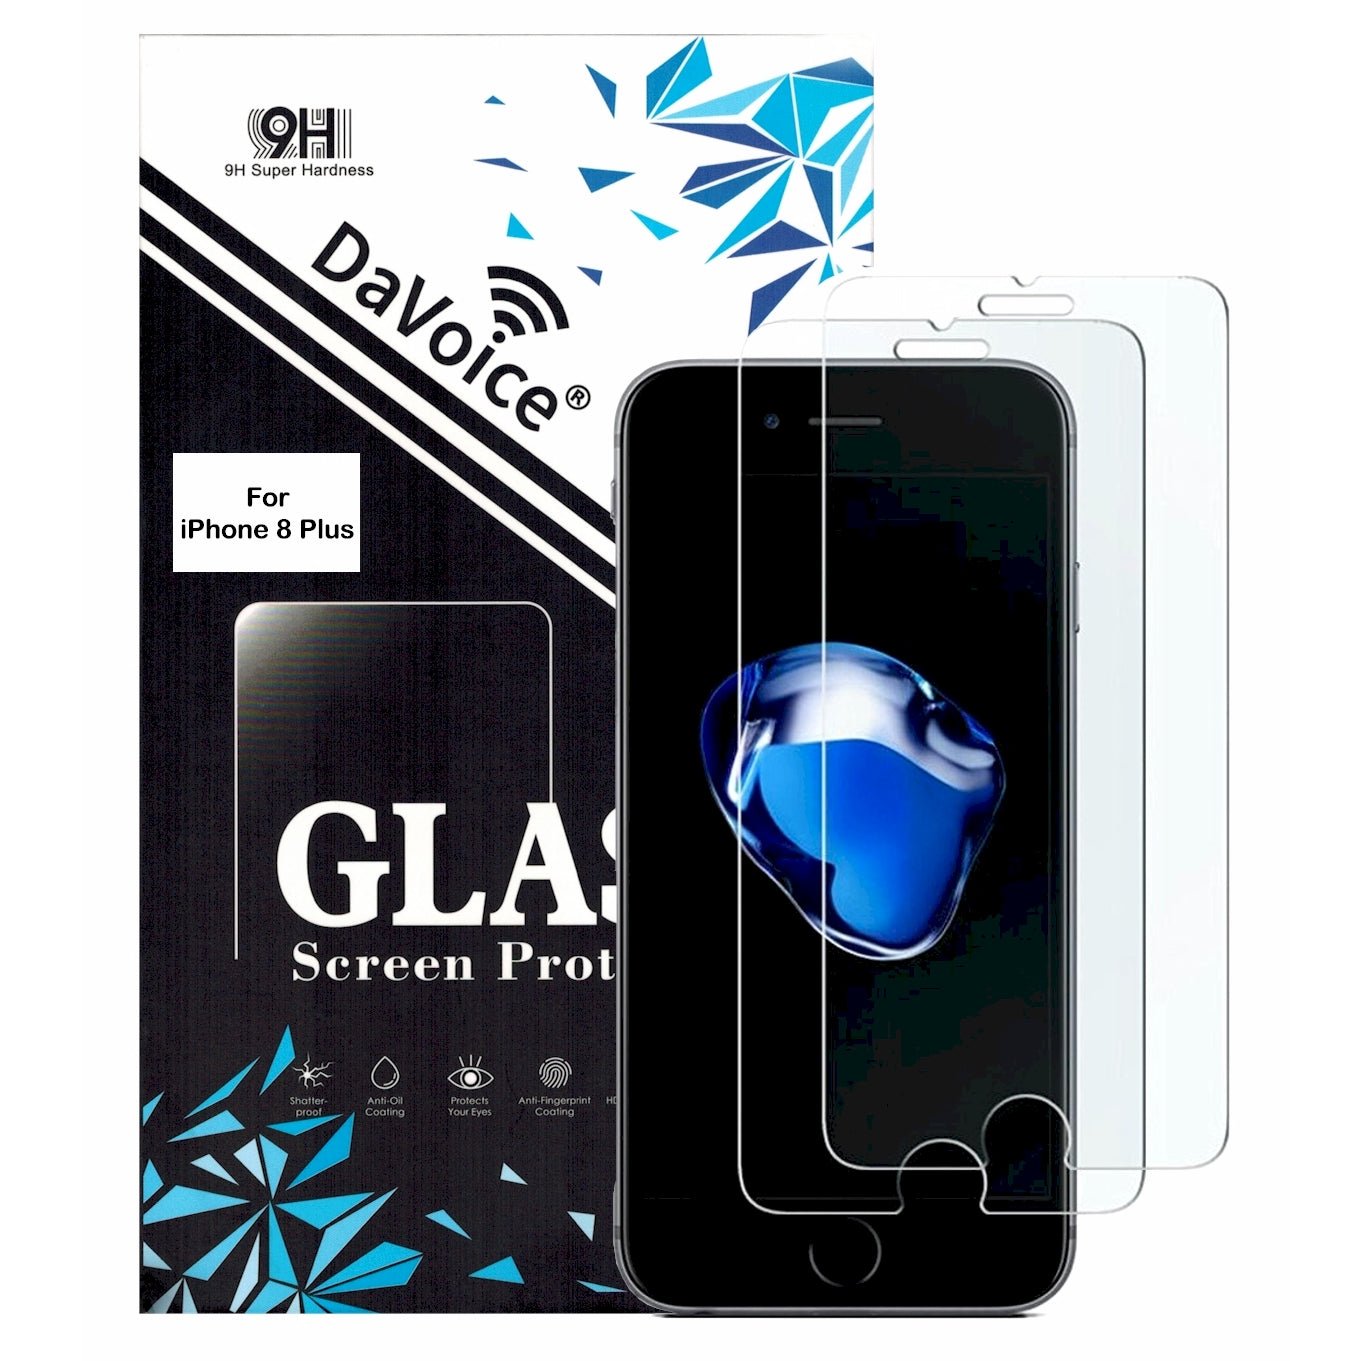 iPhone 8 Plus Screen Protector Tempered Glass Screen Protector